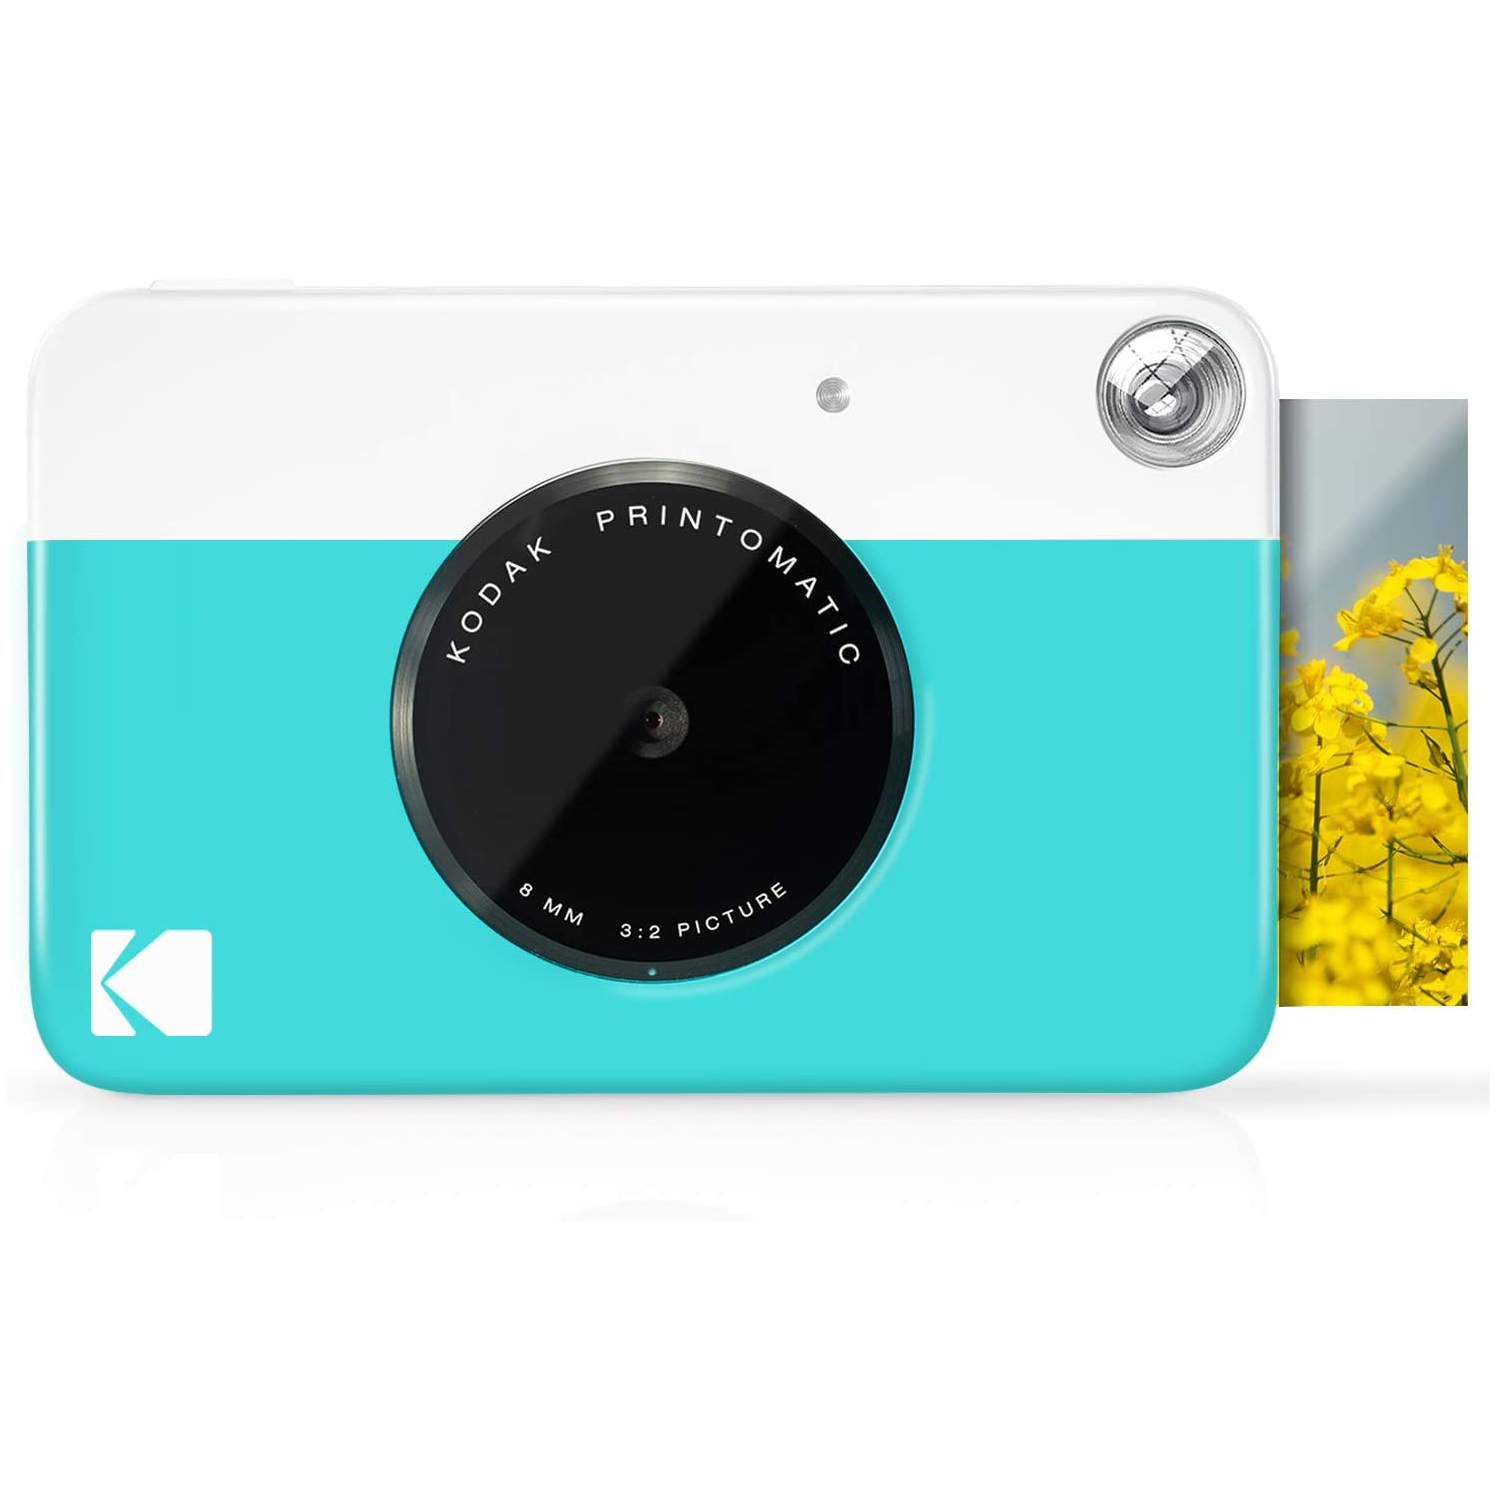 Kodak PRINTOMATIC Digital Instant Print Camera (Blue), Full Color Prints On Zink 2x3 Sticky-Backed Photo Paper - Print Memories Instantly